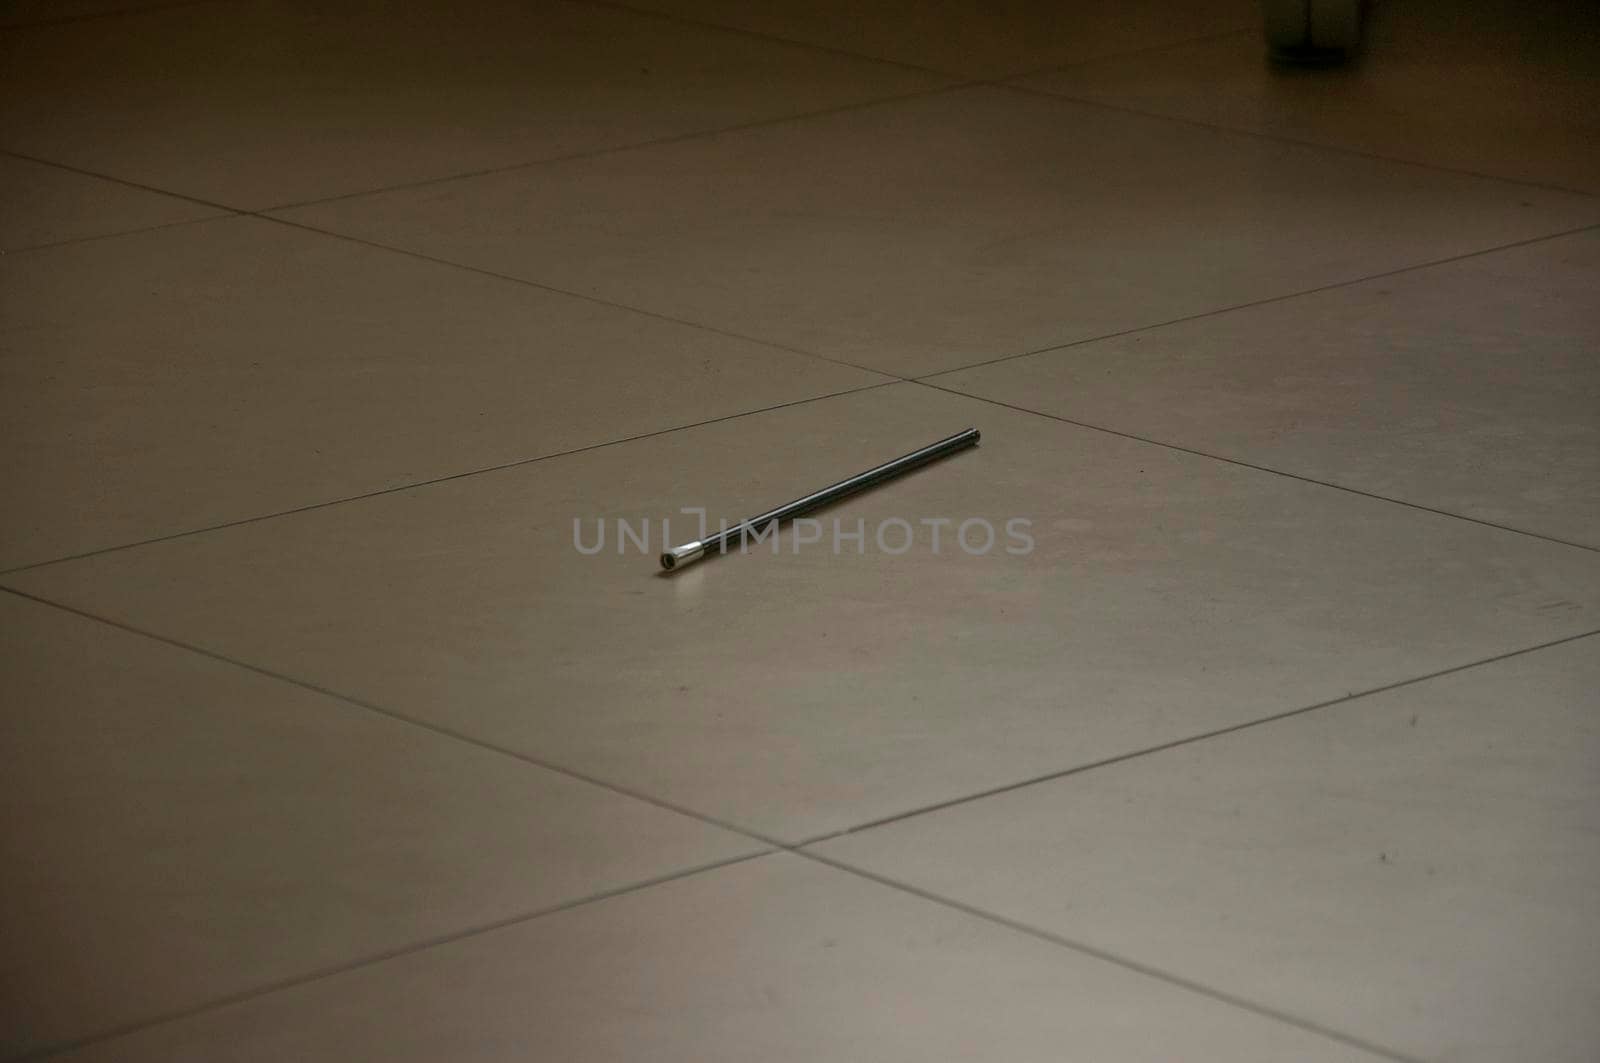 A black pencil on the floor. by inxti